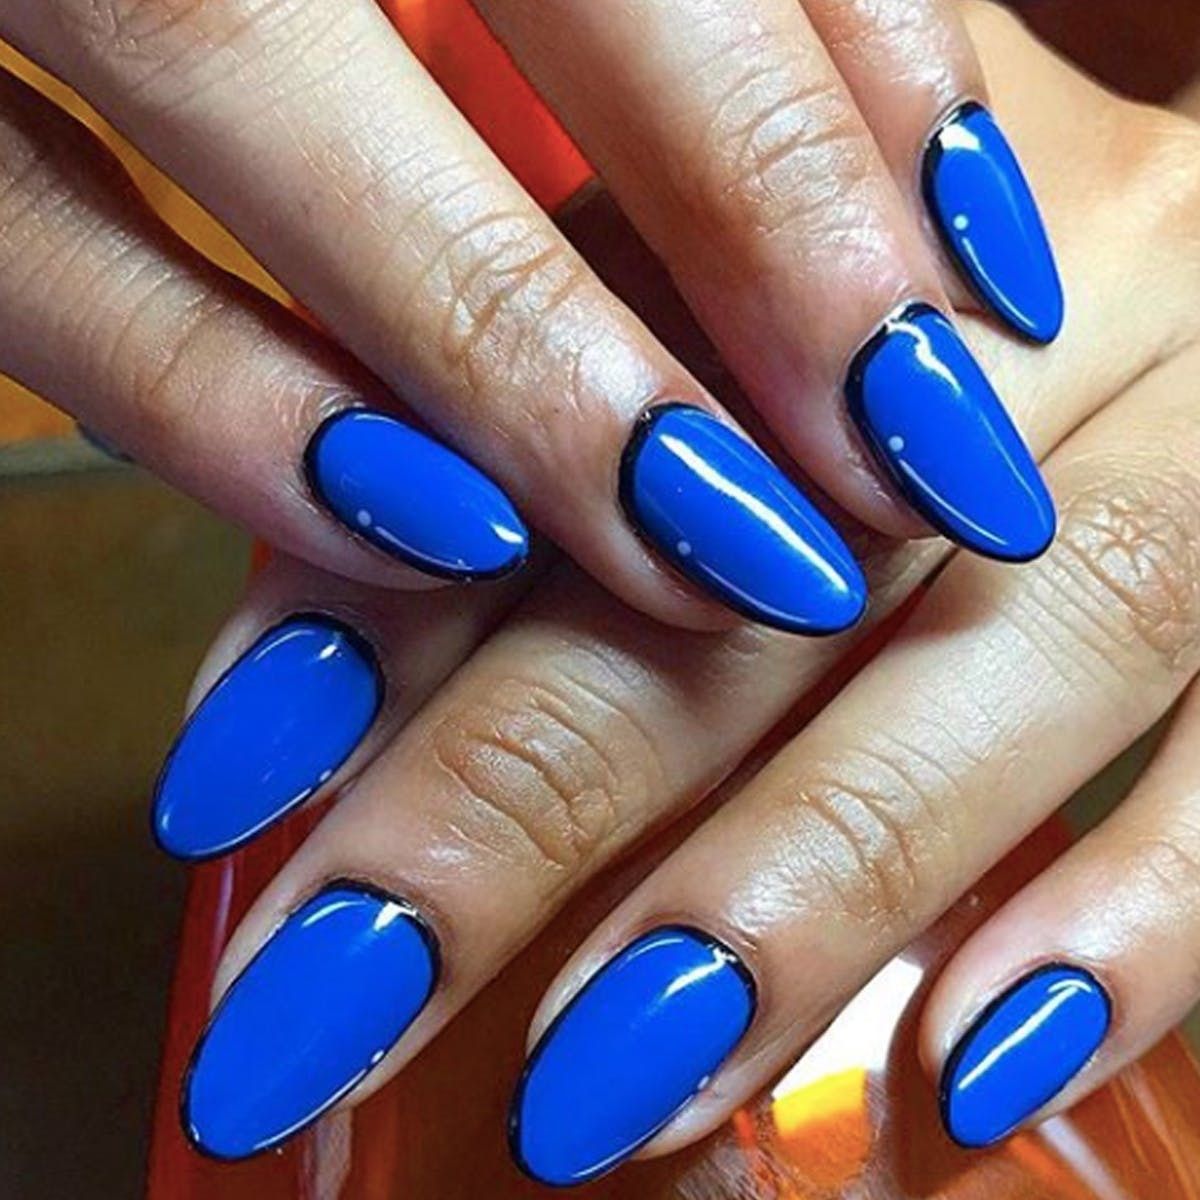 Outline Nails Are the Minimalist Manicure Trend You’ve Been Waiting For